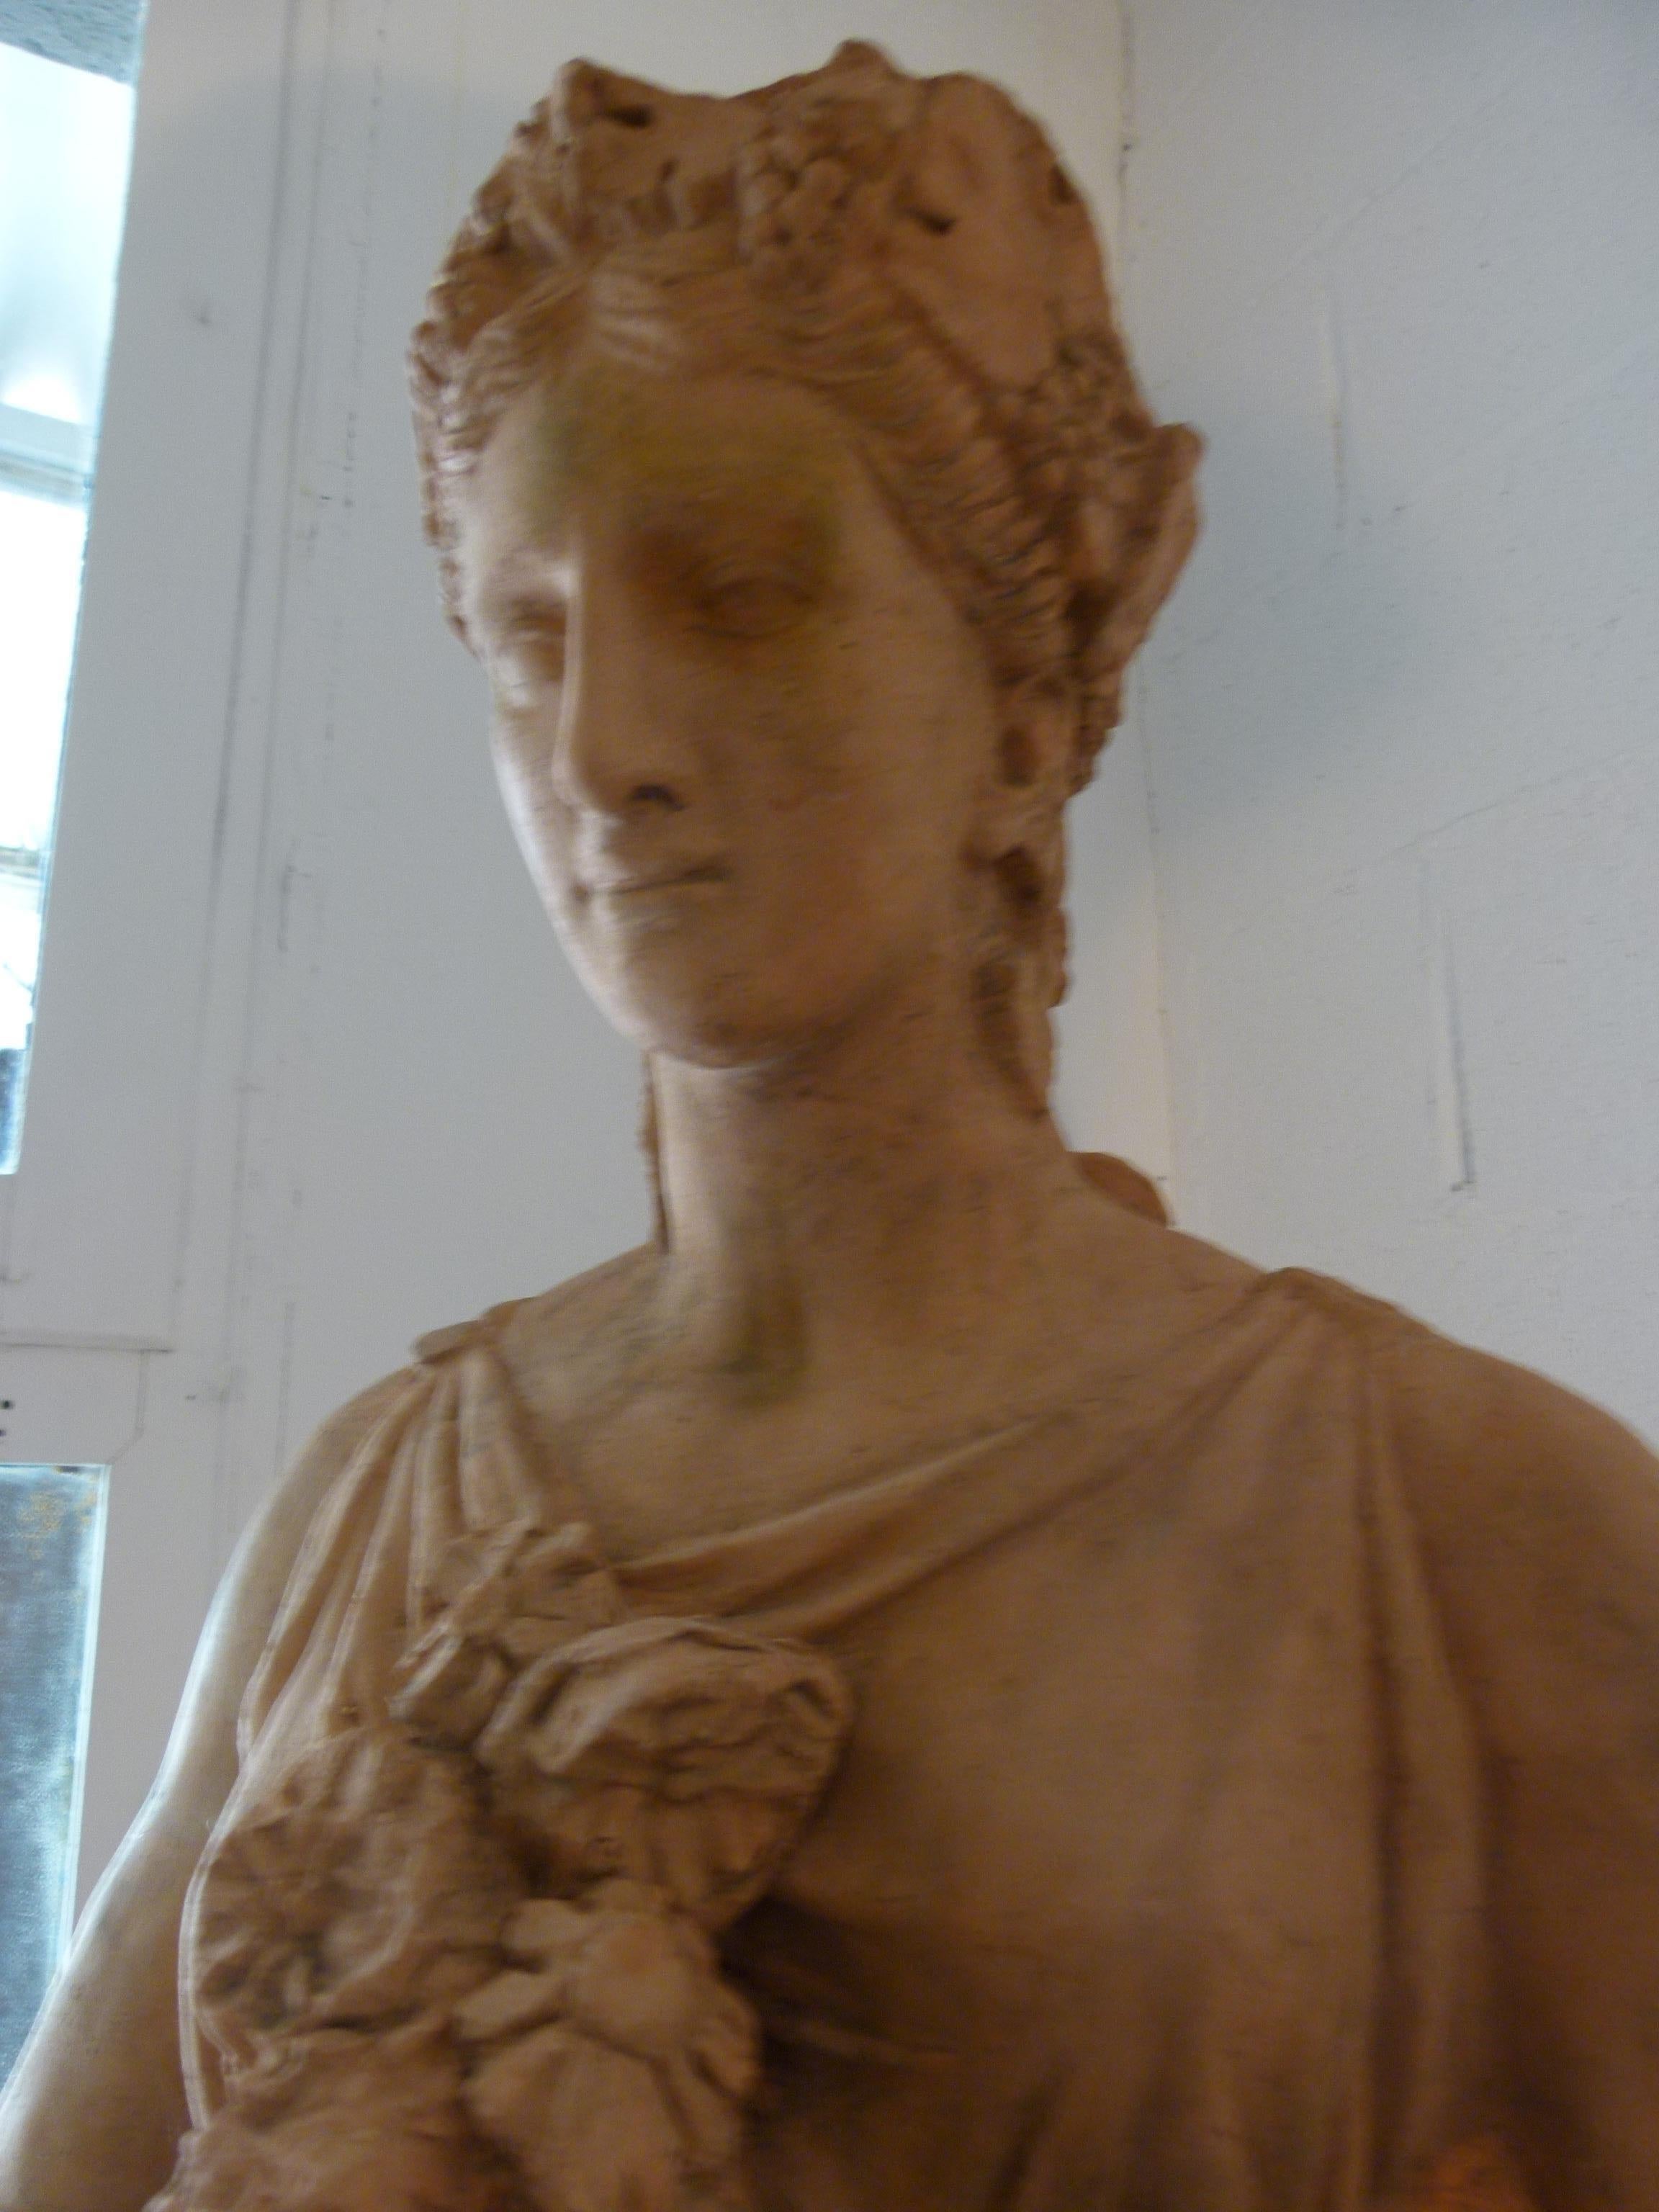 Hand-Carved 20th Century French Terracotta Statue, Neoclassical Greco-Roman Inspired